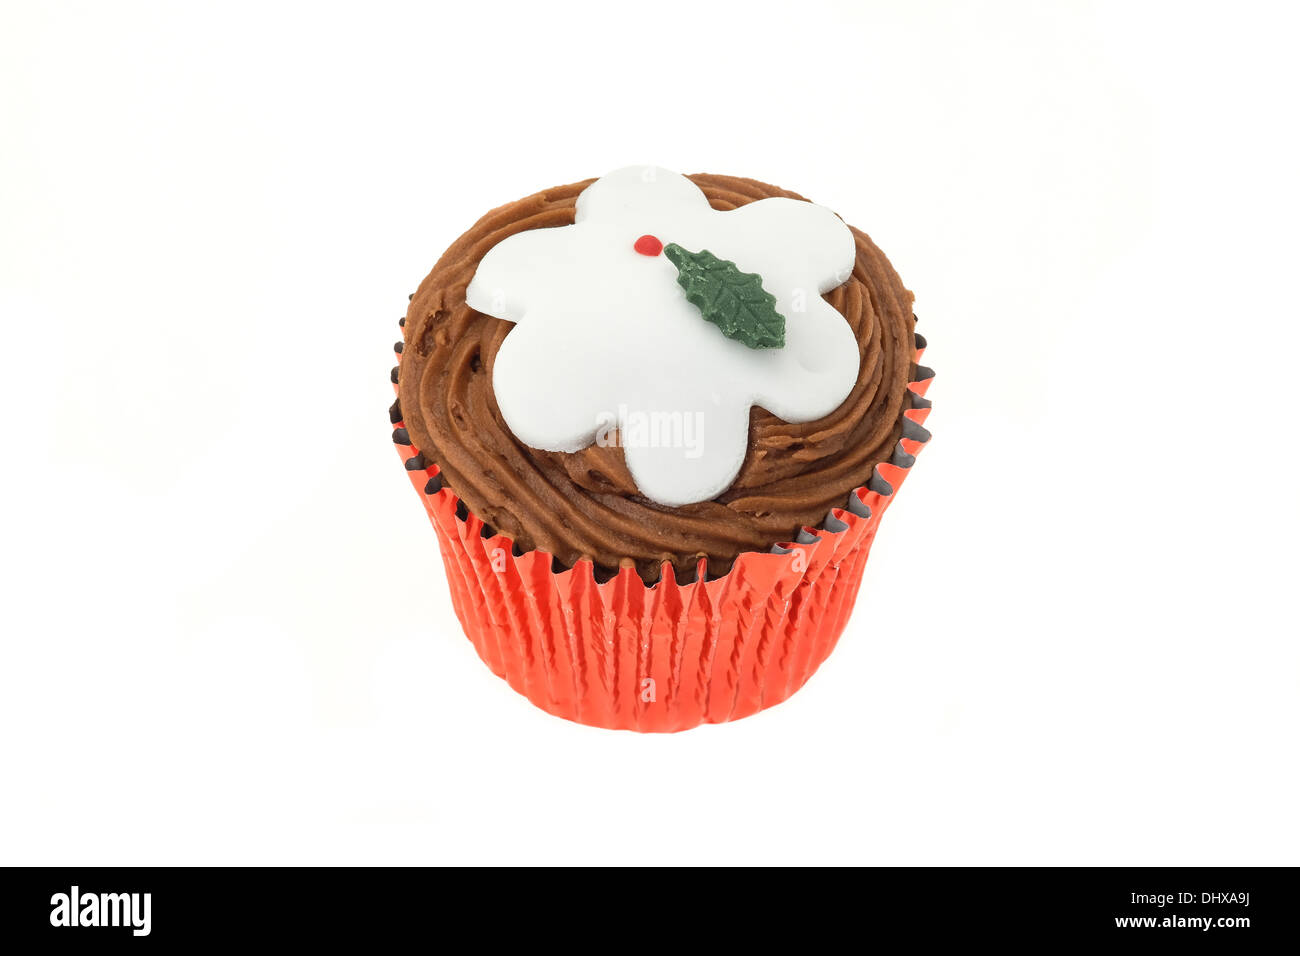 A cupcake with a decorated Christmas design of a Christmas pudding - studio shot with a white background Stock Photo